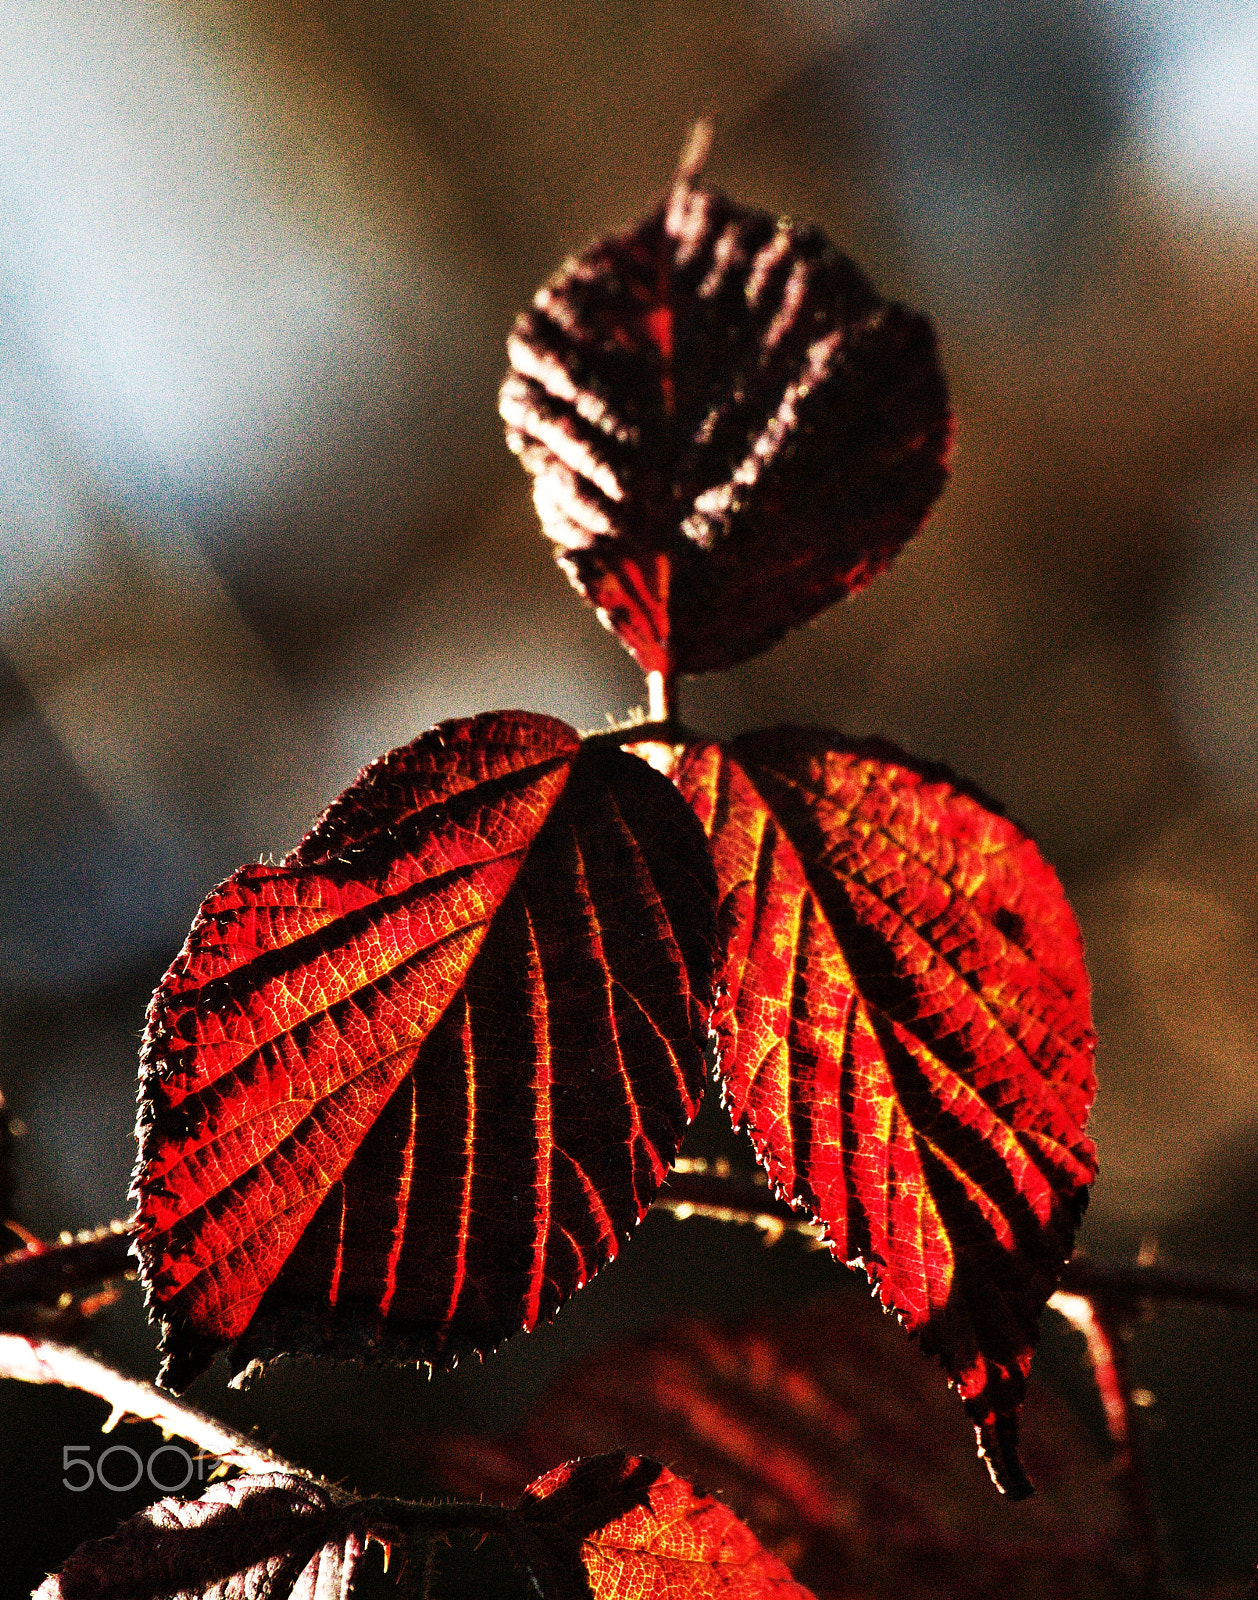 55.00 - 200.00 mm f/4.0 - 5.6 sample photo. Red little leafs photography